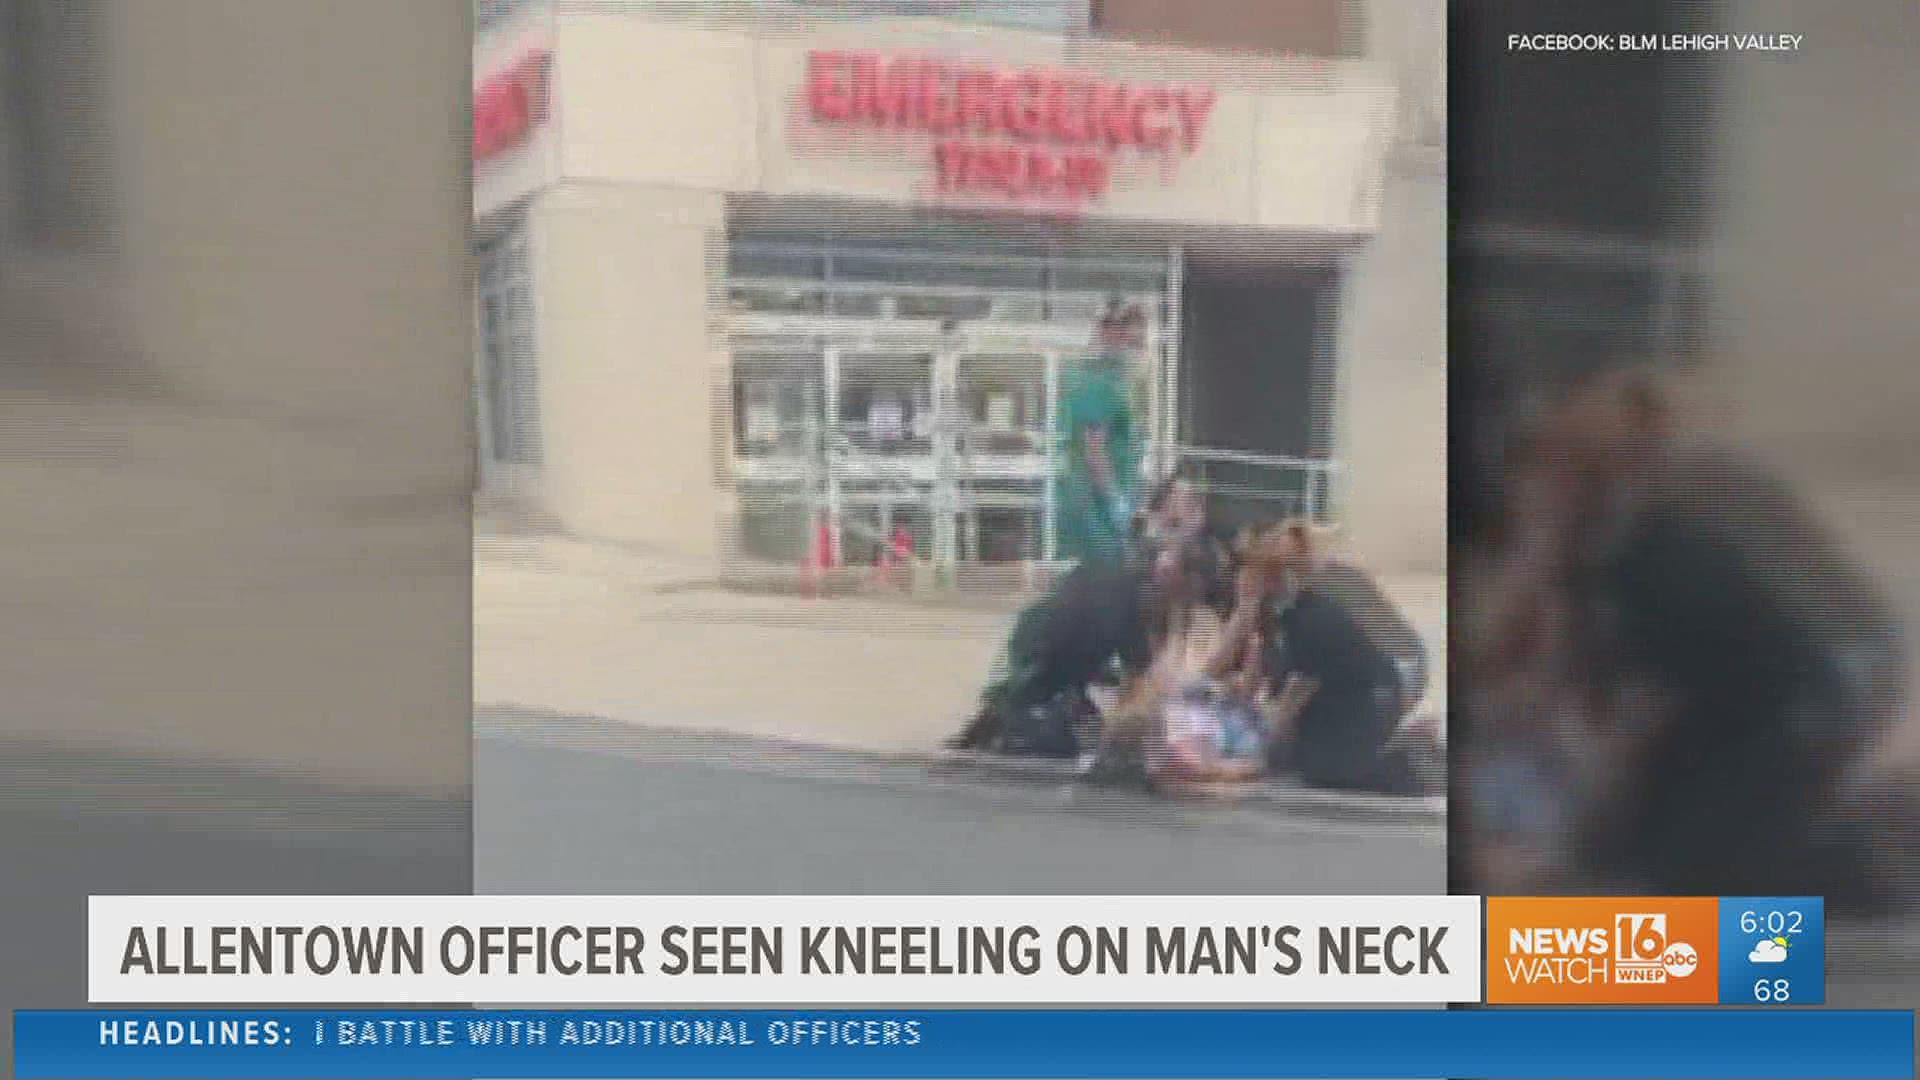 A 24-second video showing an officer kneeling on a man's neck ignited racial tensions in Allentown. The question: did police go too far in restraining a man?